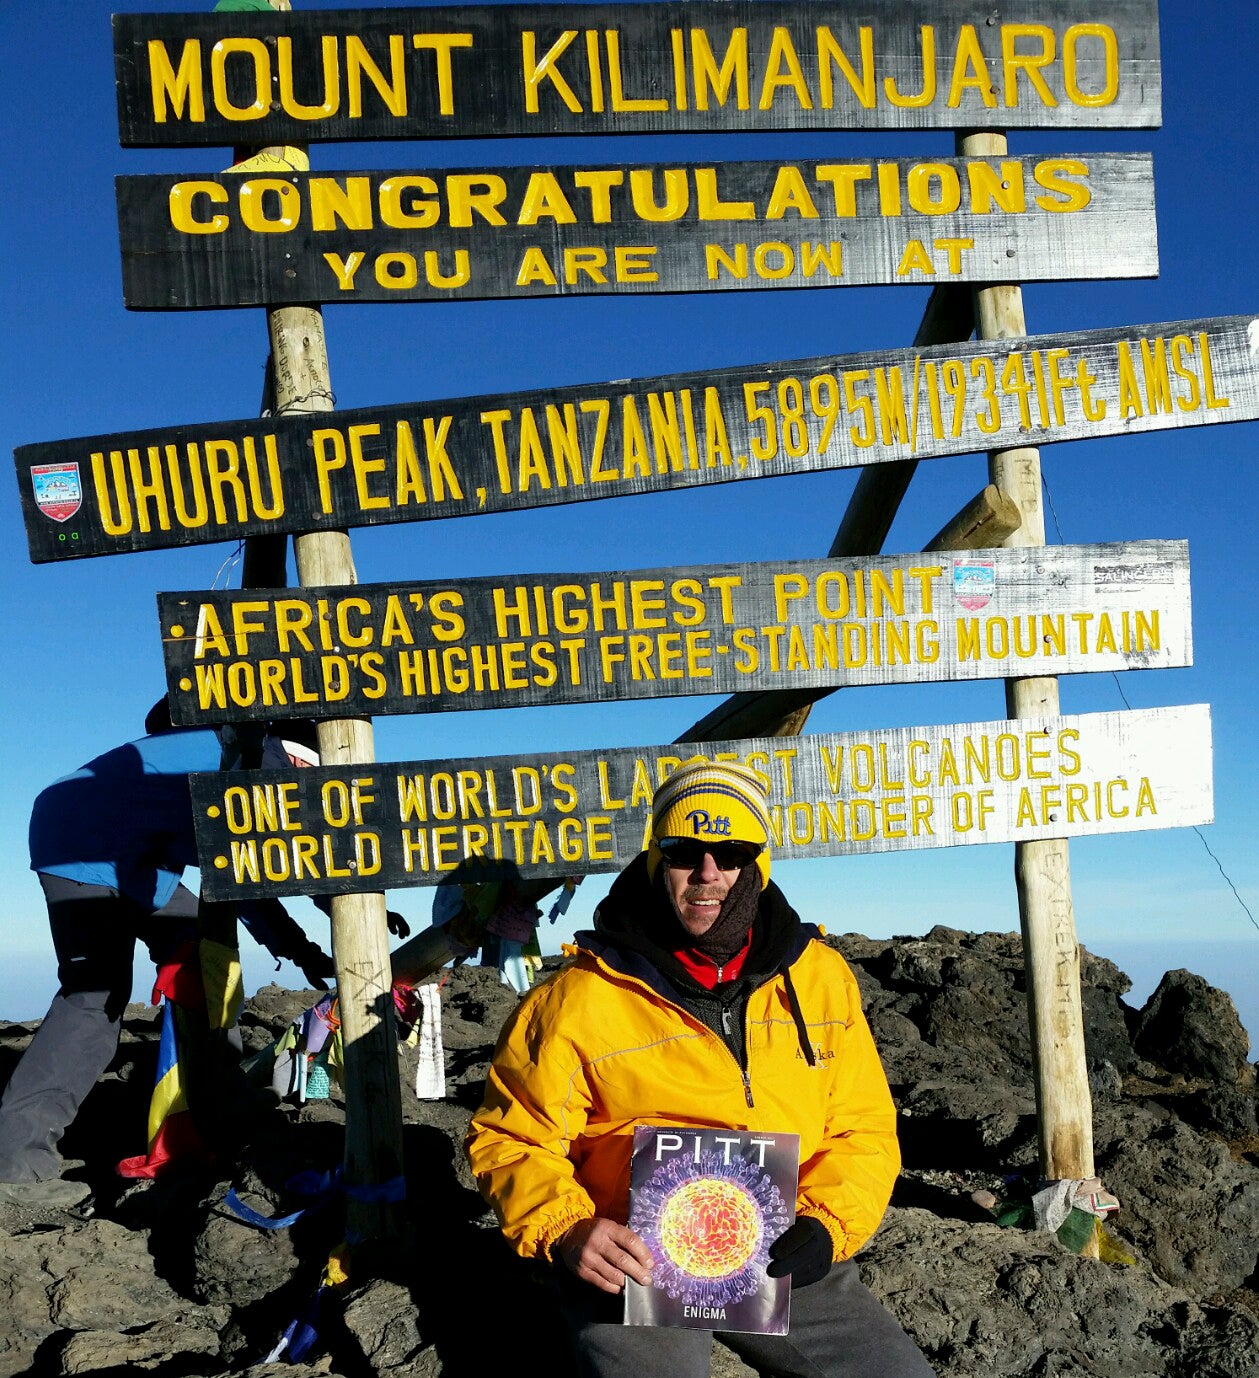 Chris Meilinger (PHARM ’90) took Pitt Magazine to new heights when he brought it along on a climb to the top of Tanzania's famed Mount Kilimanjaro.